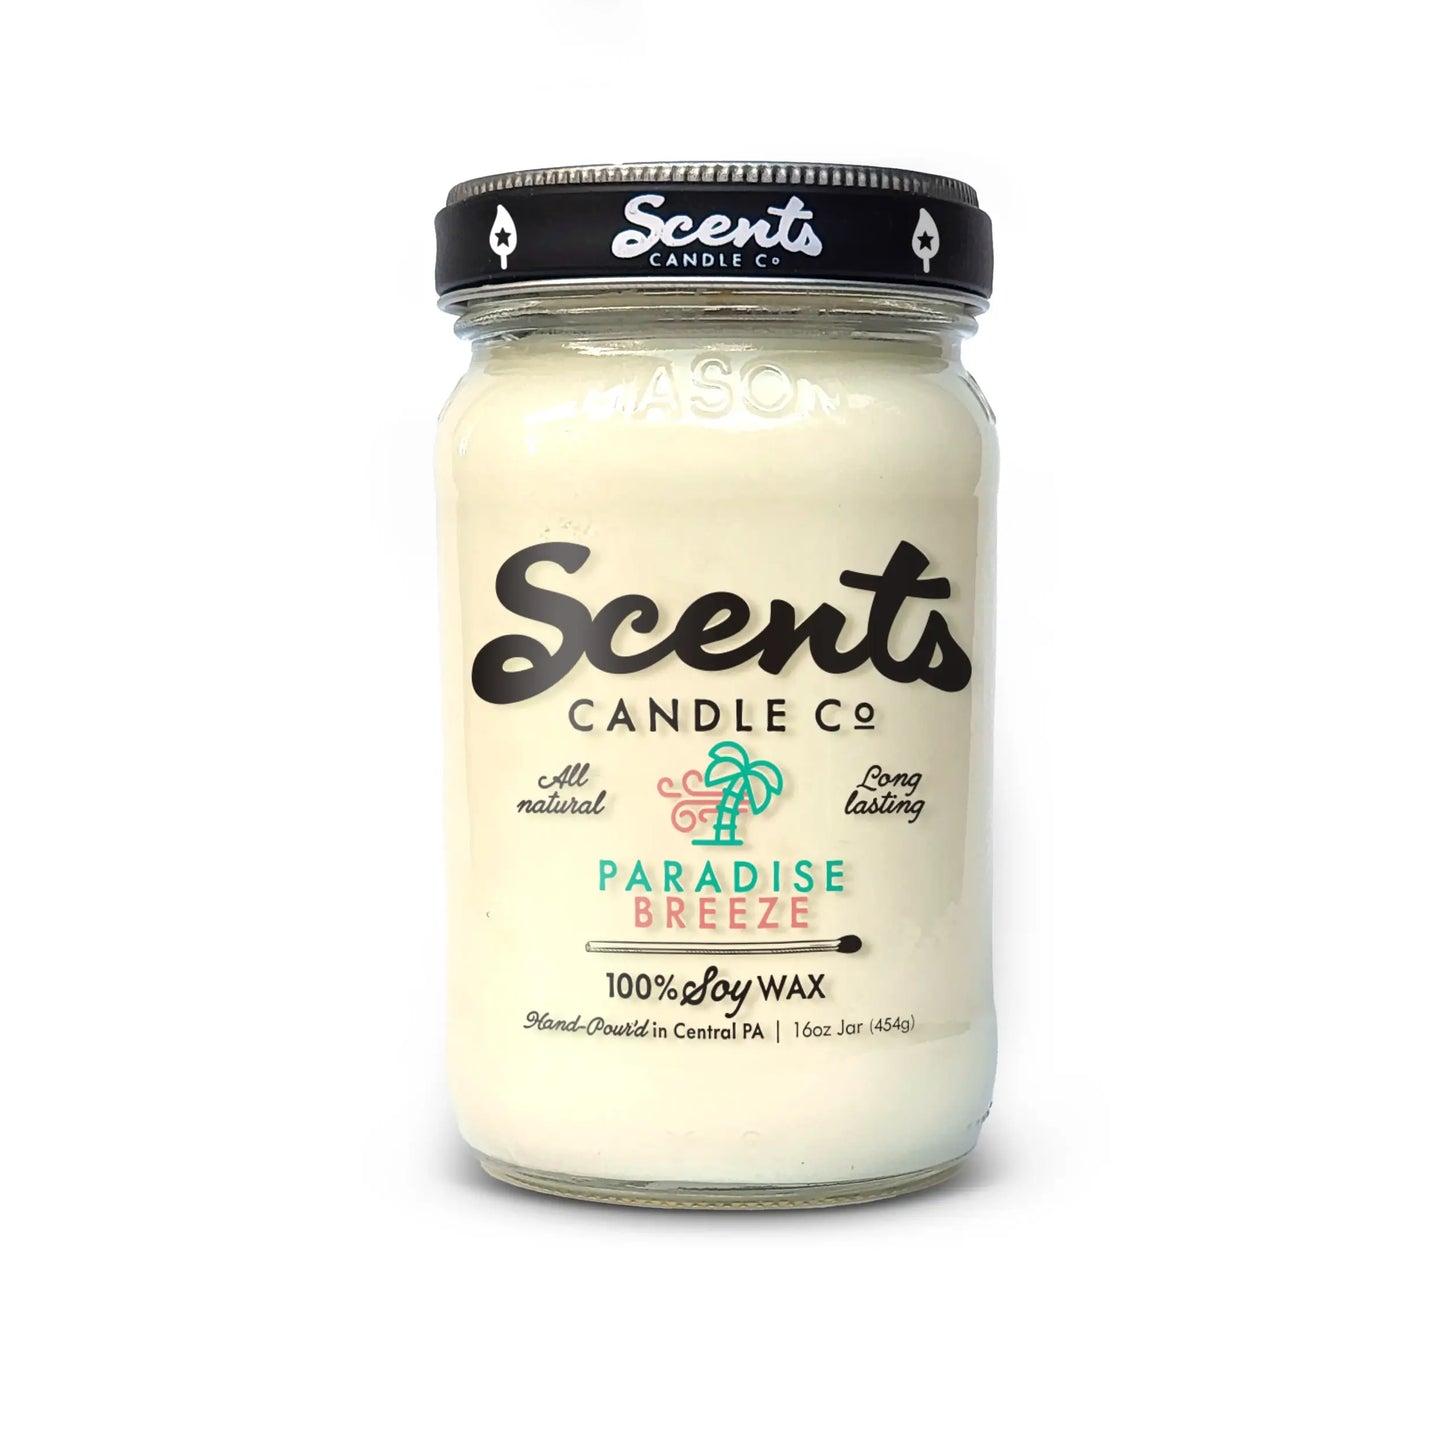 Scents Candle Co. Paradise Breeze Soy Wax Candles